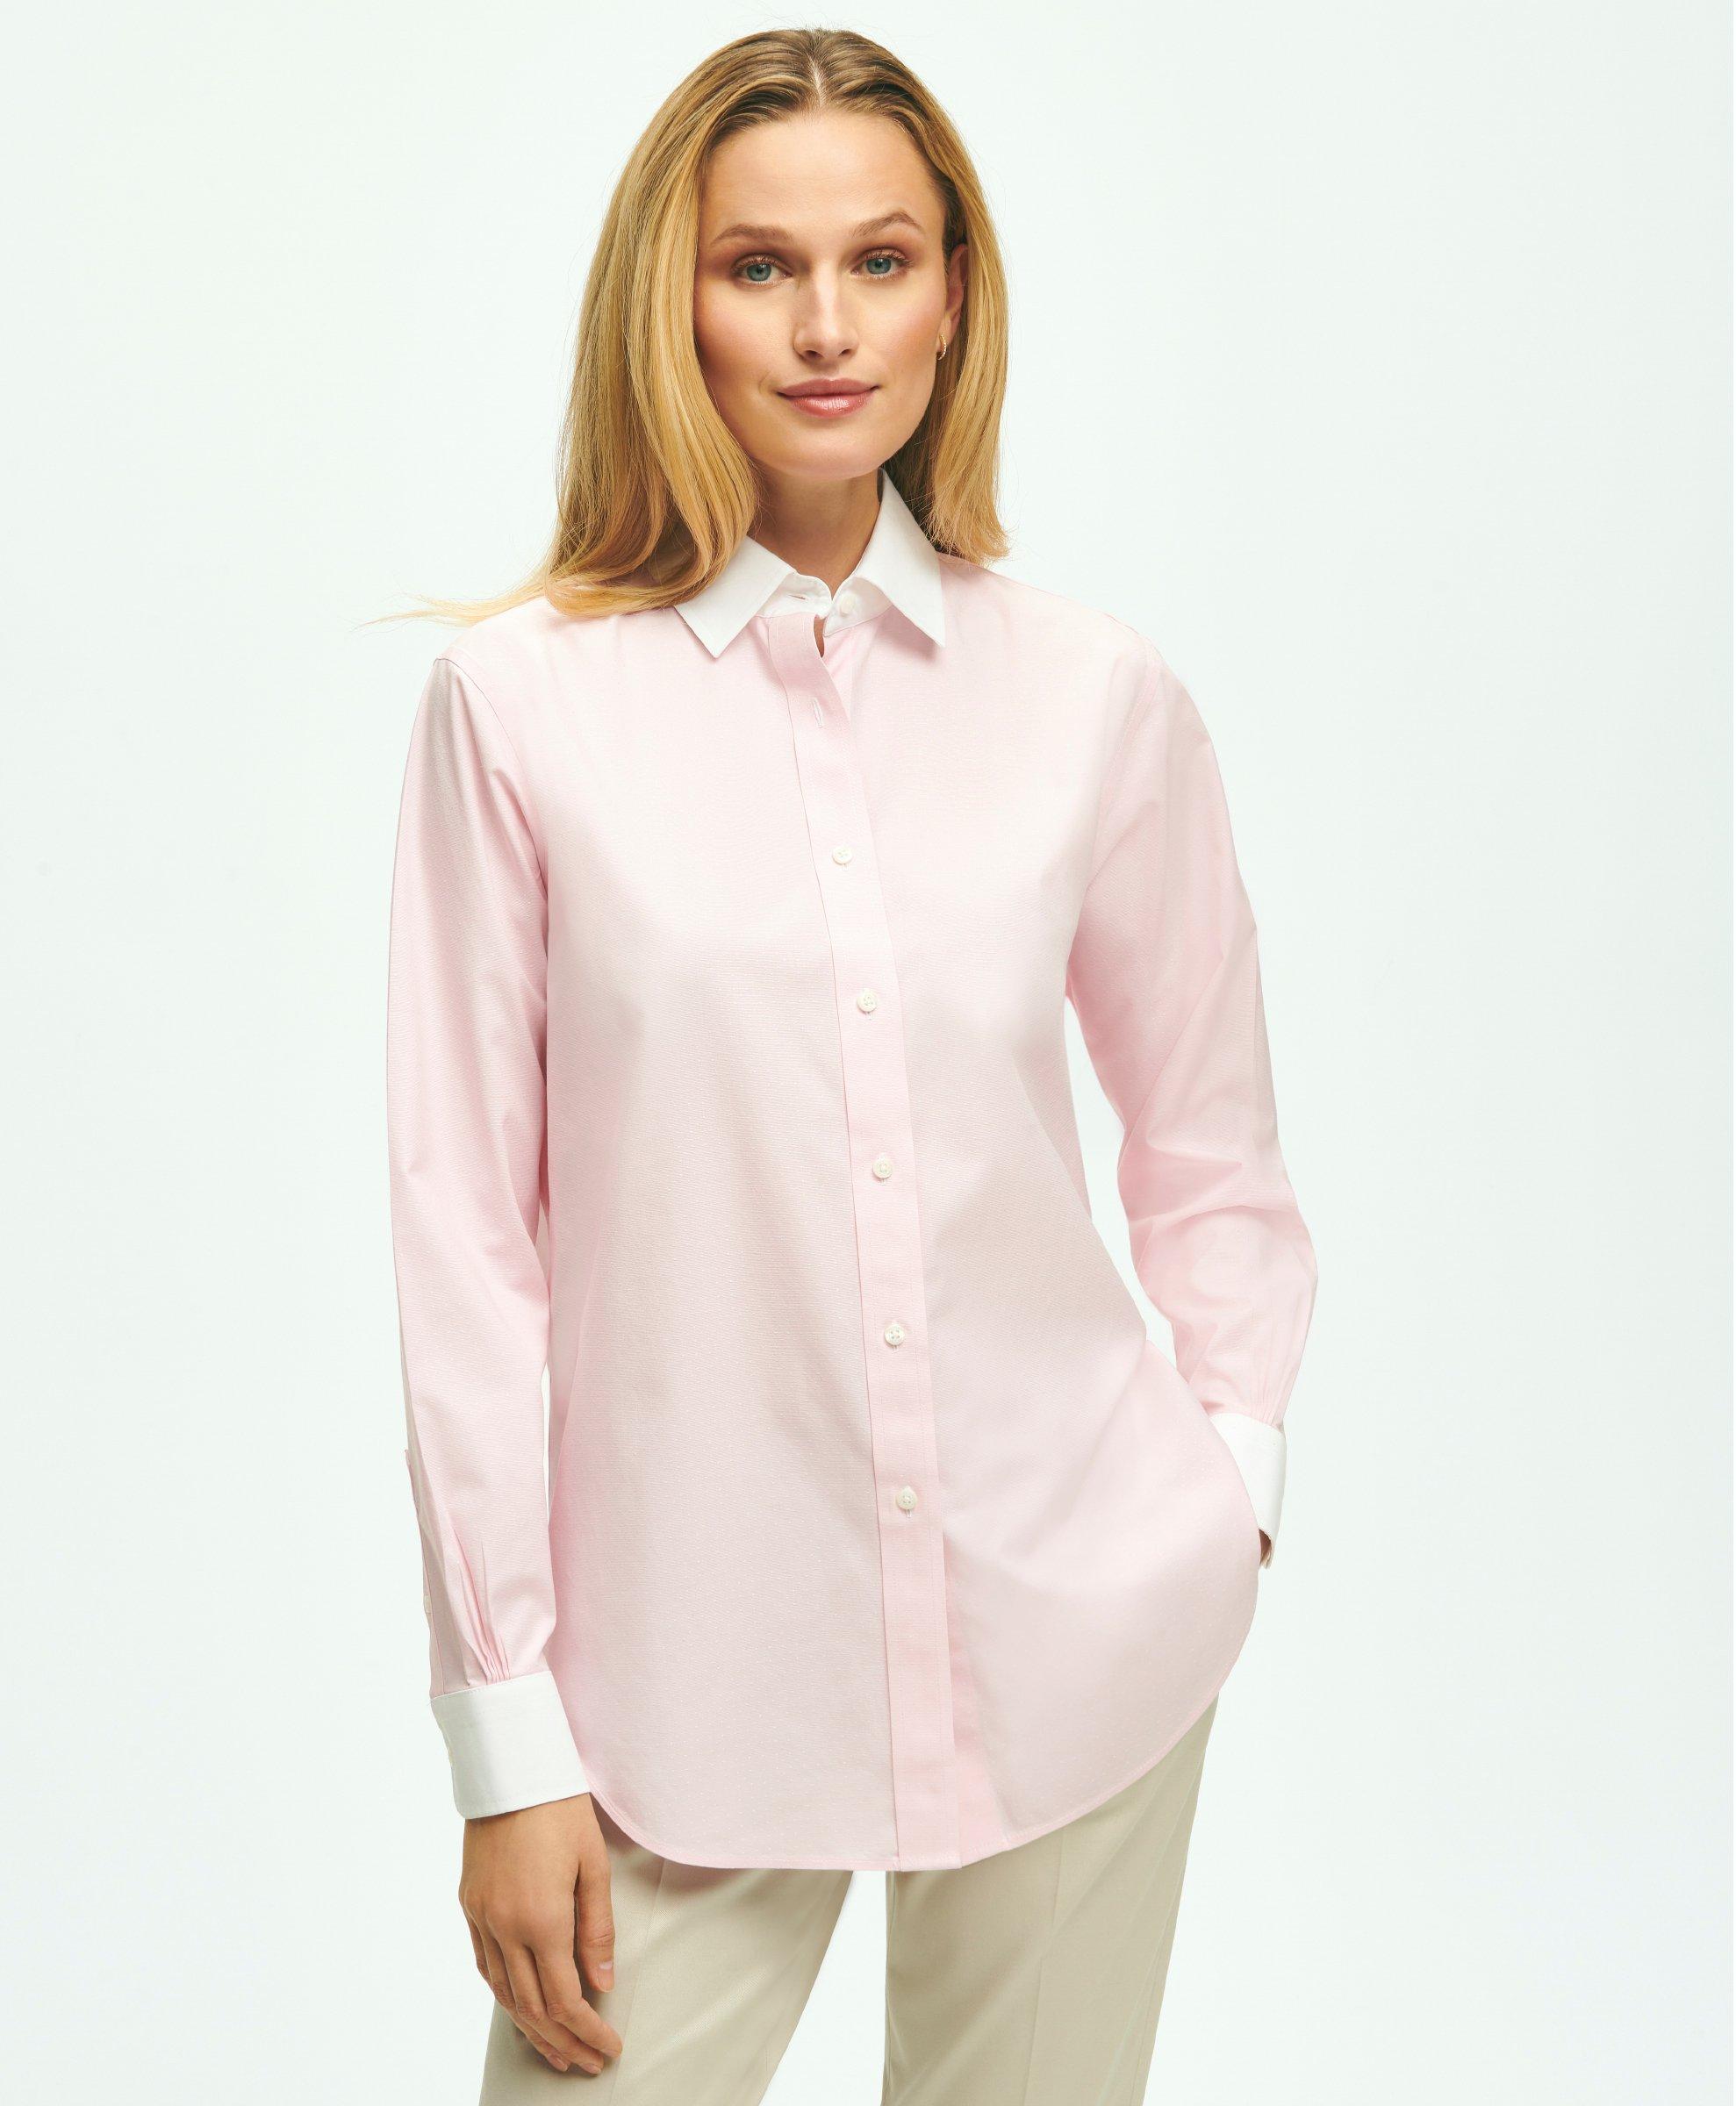 Brooks Brothers Relaxed Fit Non-iron Stretch Supima Cotton Shirt With White Collar & Cuffs | Dark Pink | Size 6